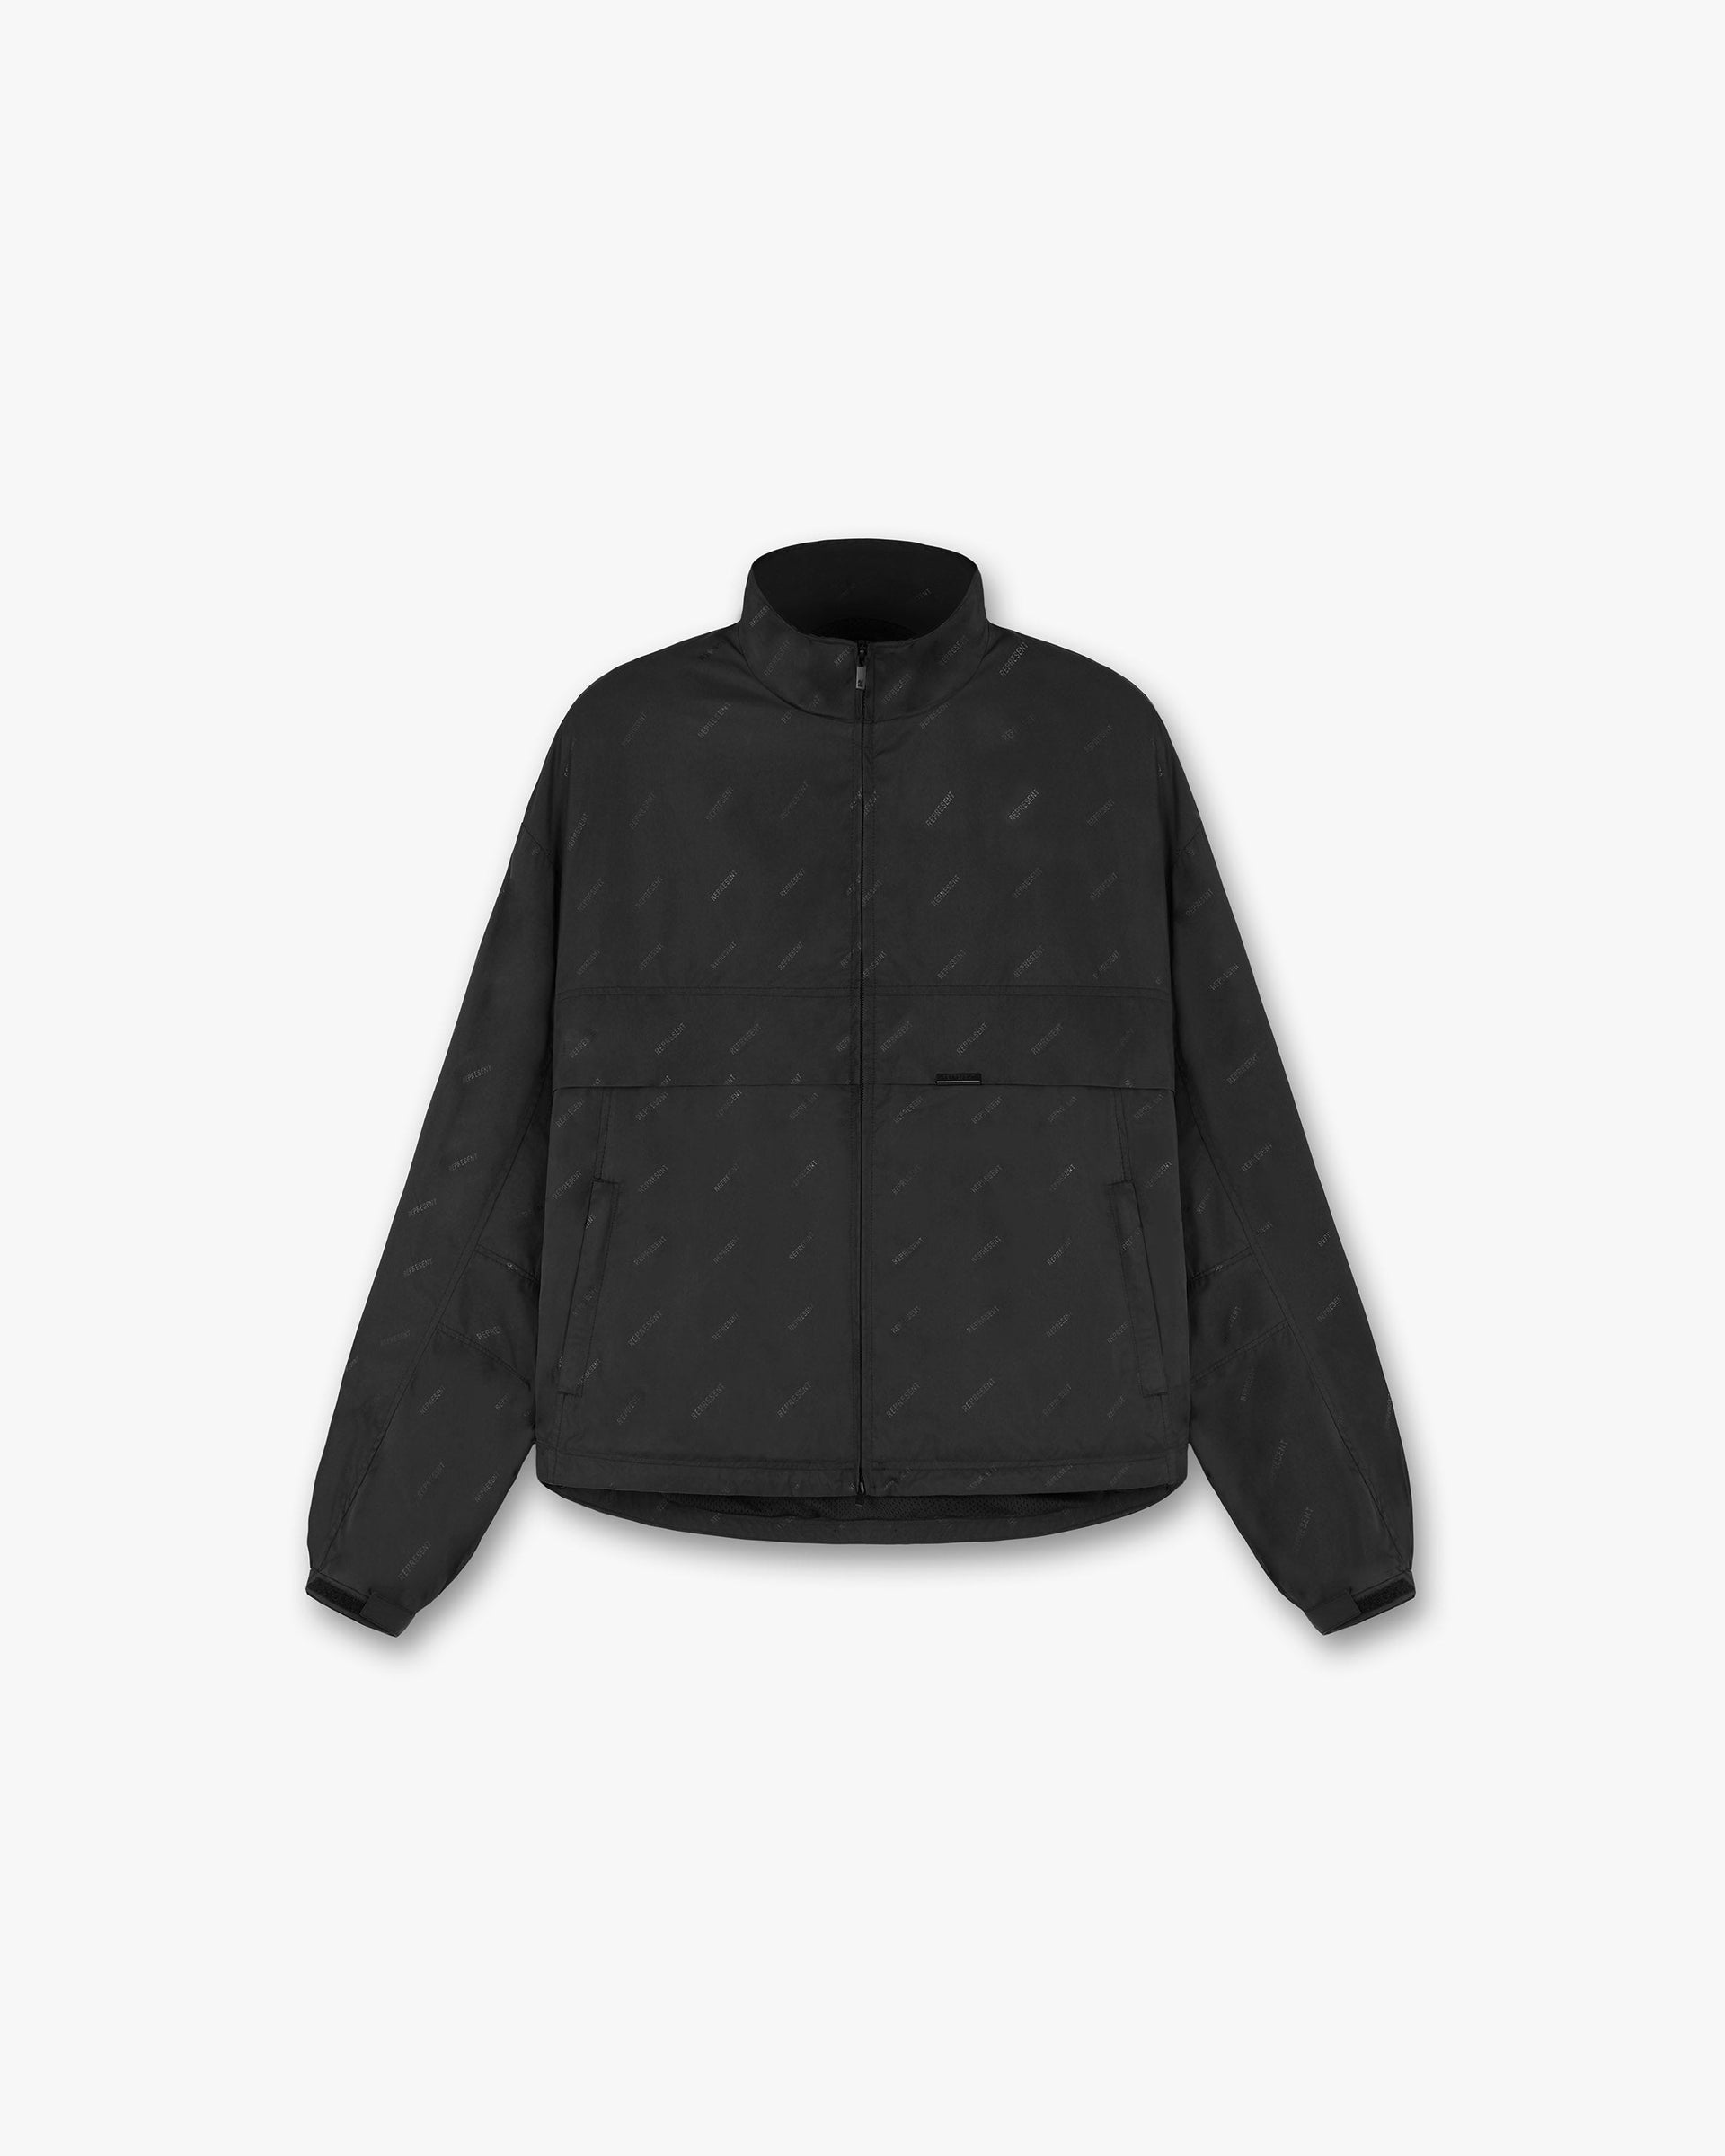 Louis Vuitton Mens Jackets, Black, M (Stock Confirmation Required)